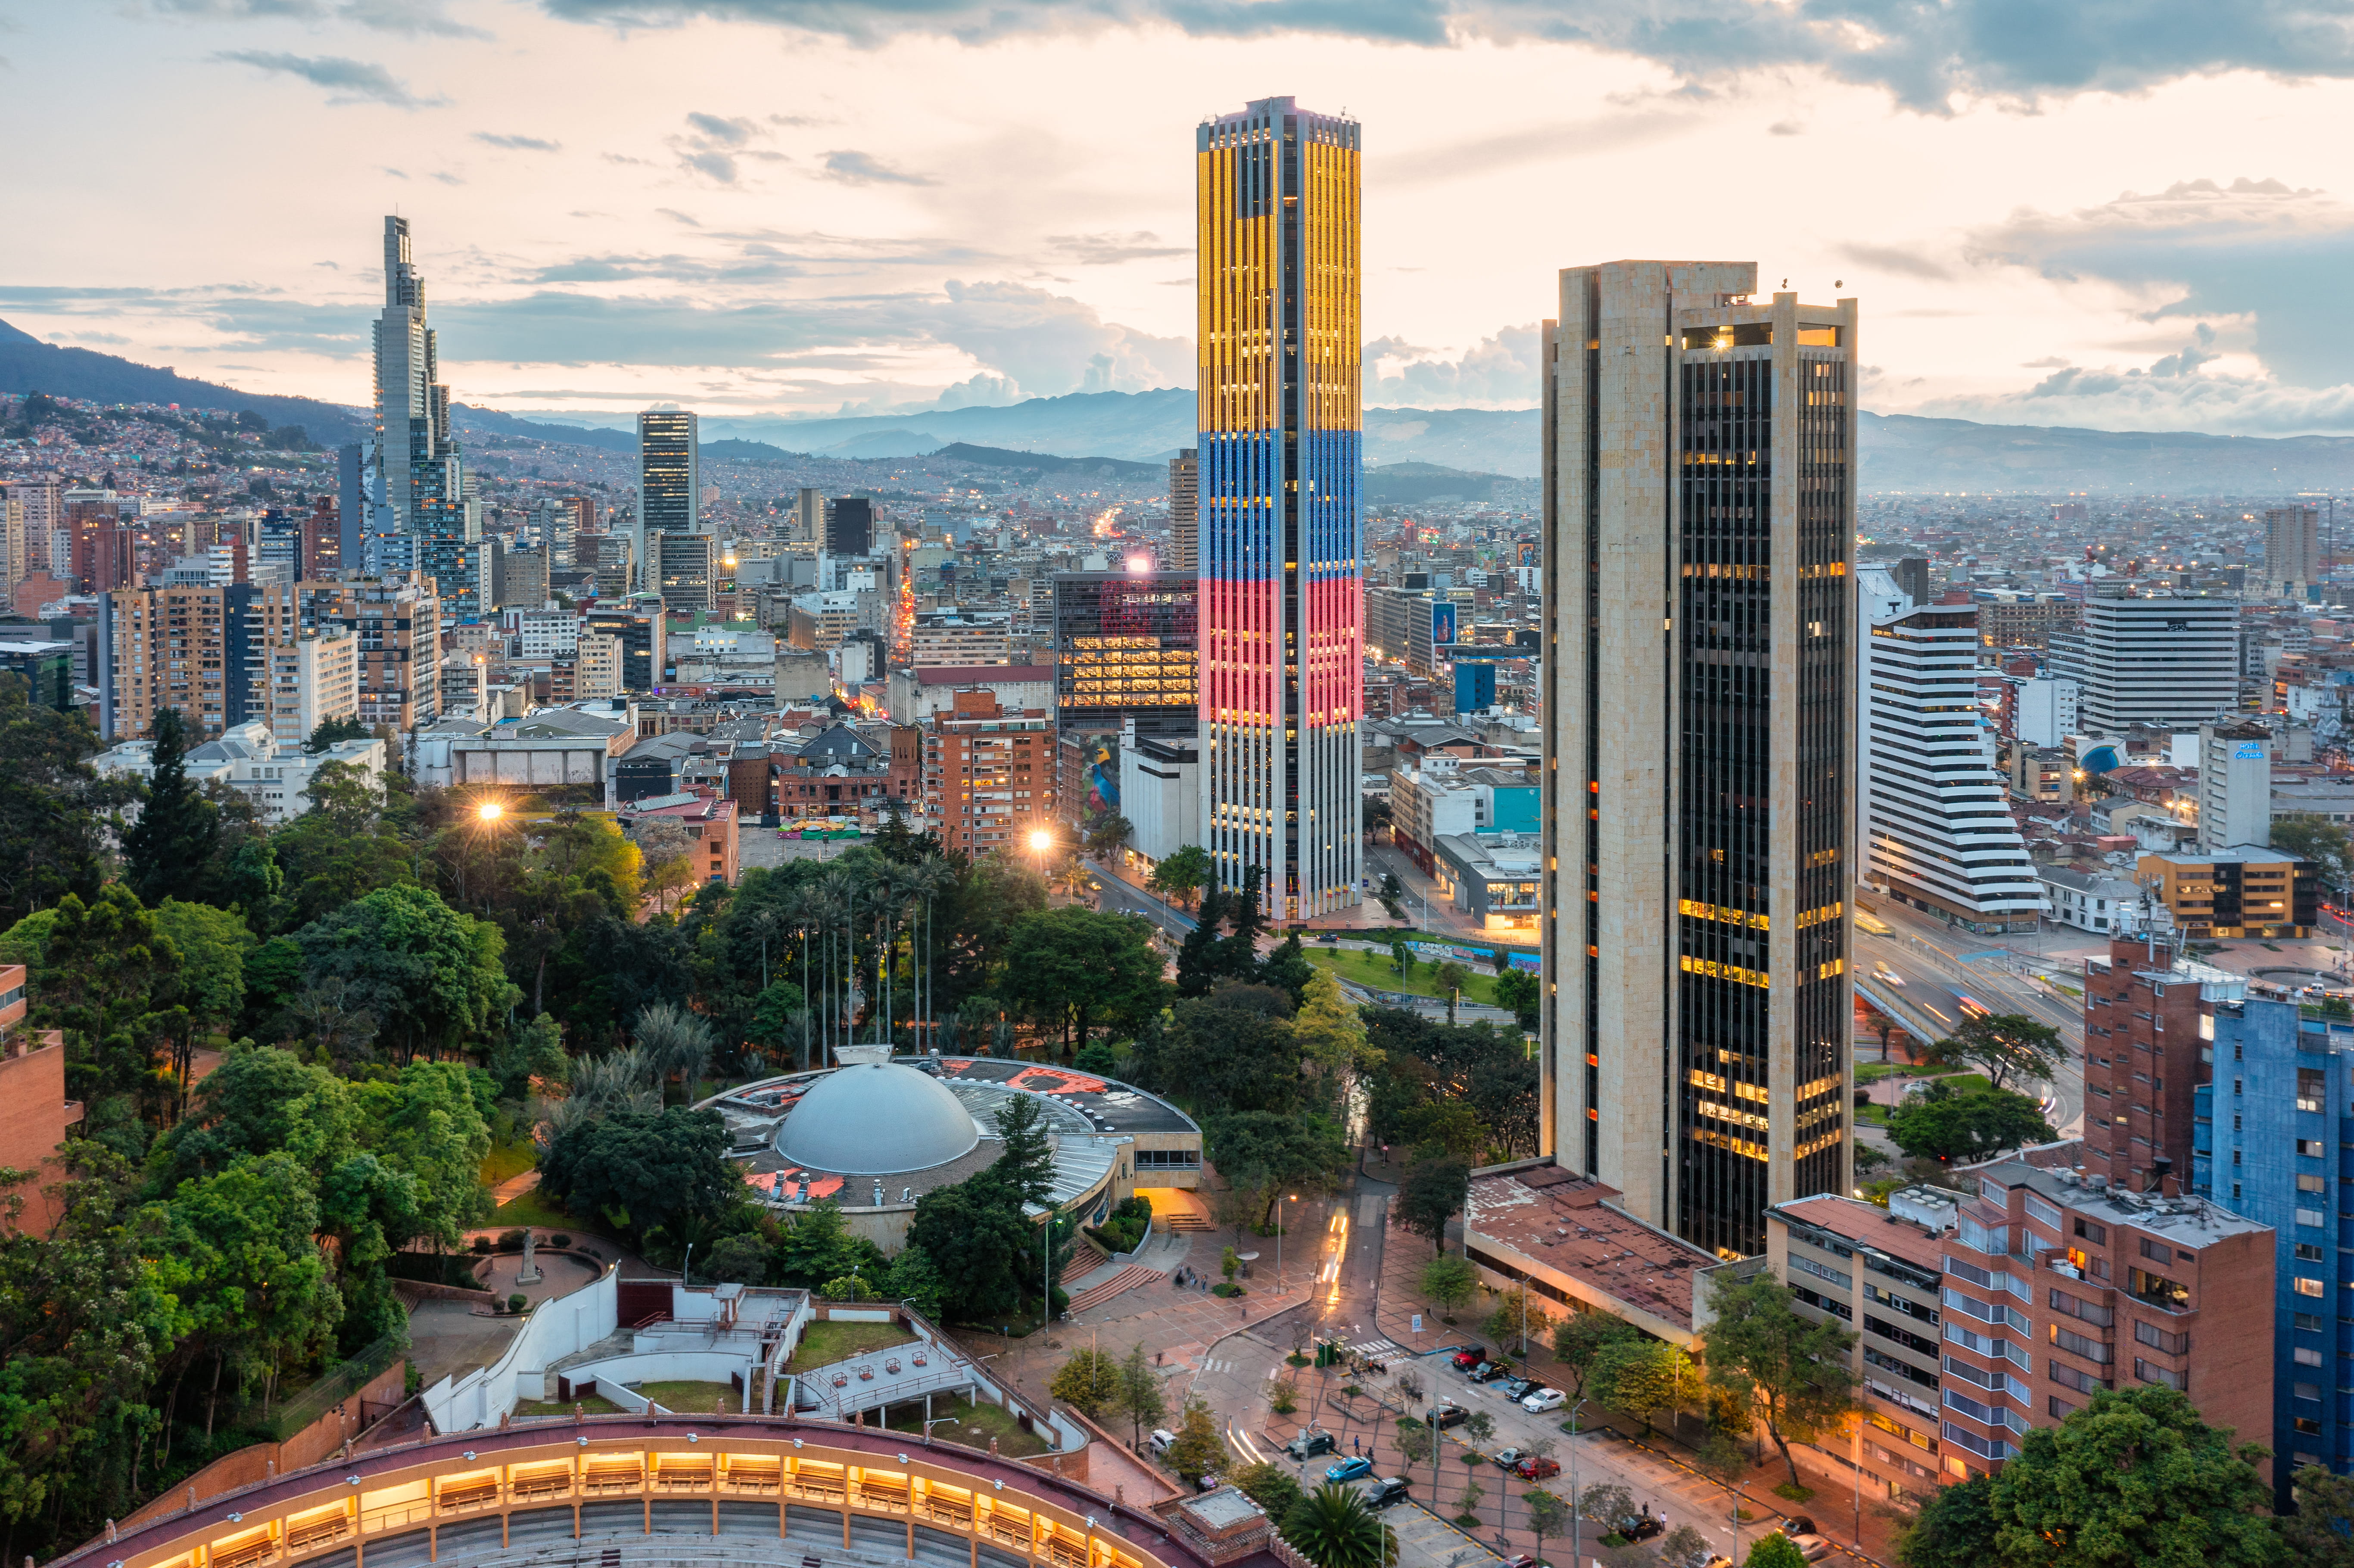 Cityscape of Bogota, Colombia, one of the locations for Kellogg GIM trips